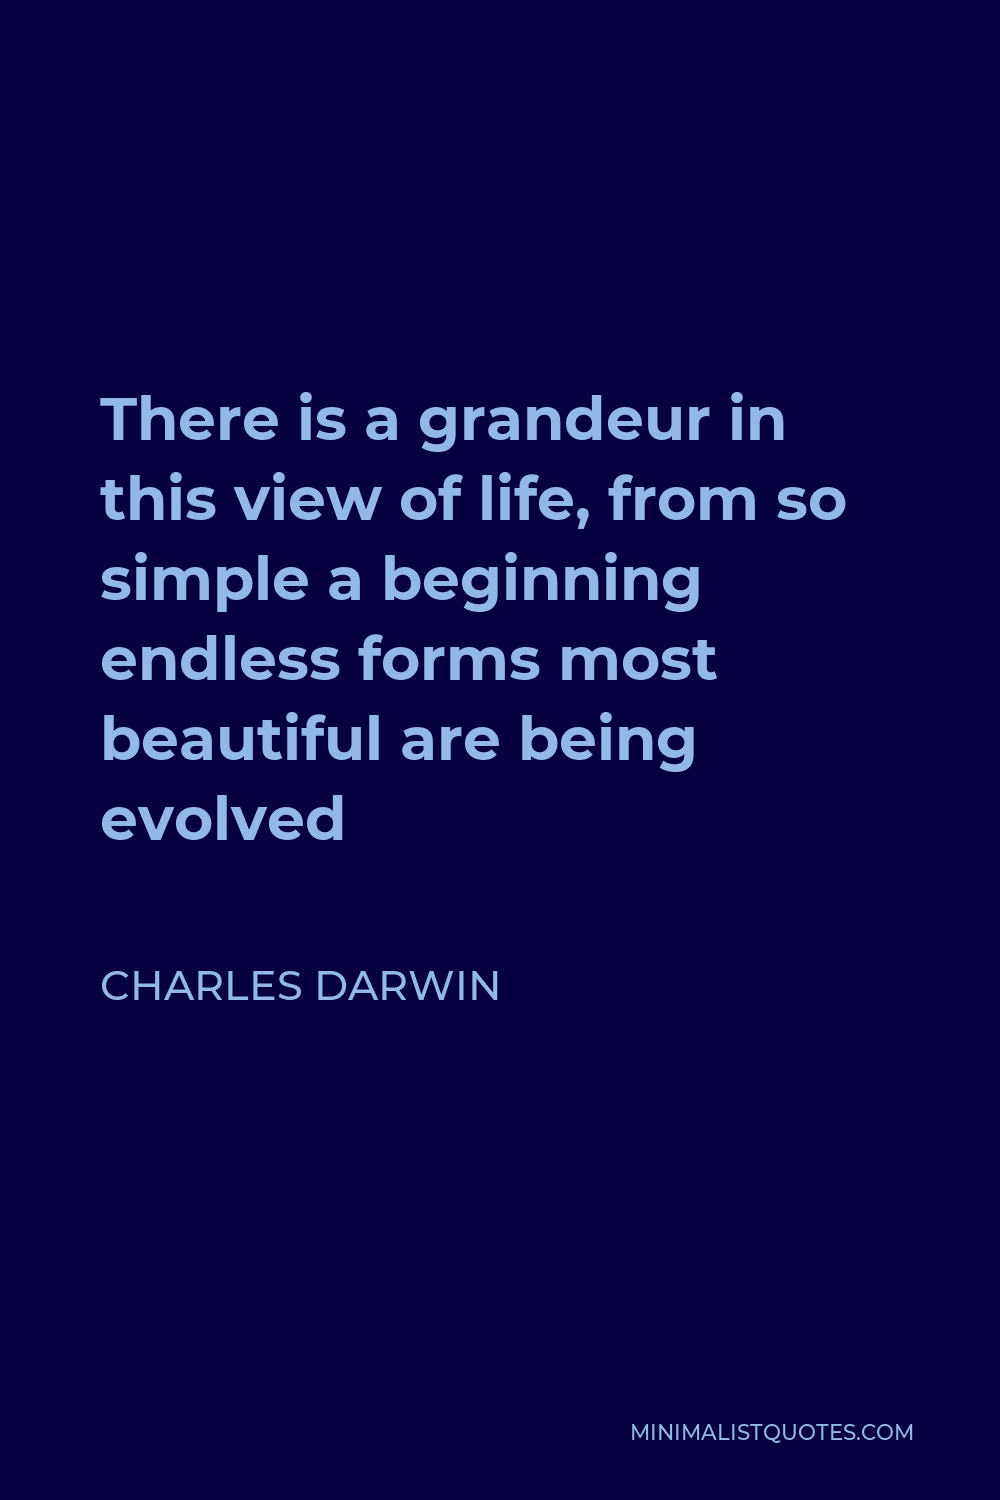 Charles Darwin Quote - There is a grandeur in this view of life, from so simple a beginning endless forms most beautiful are being evolved